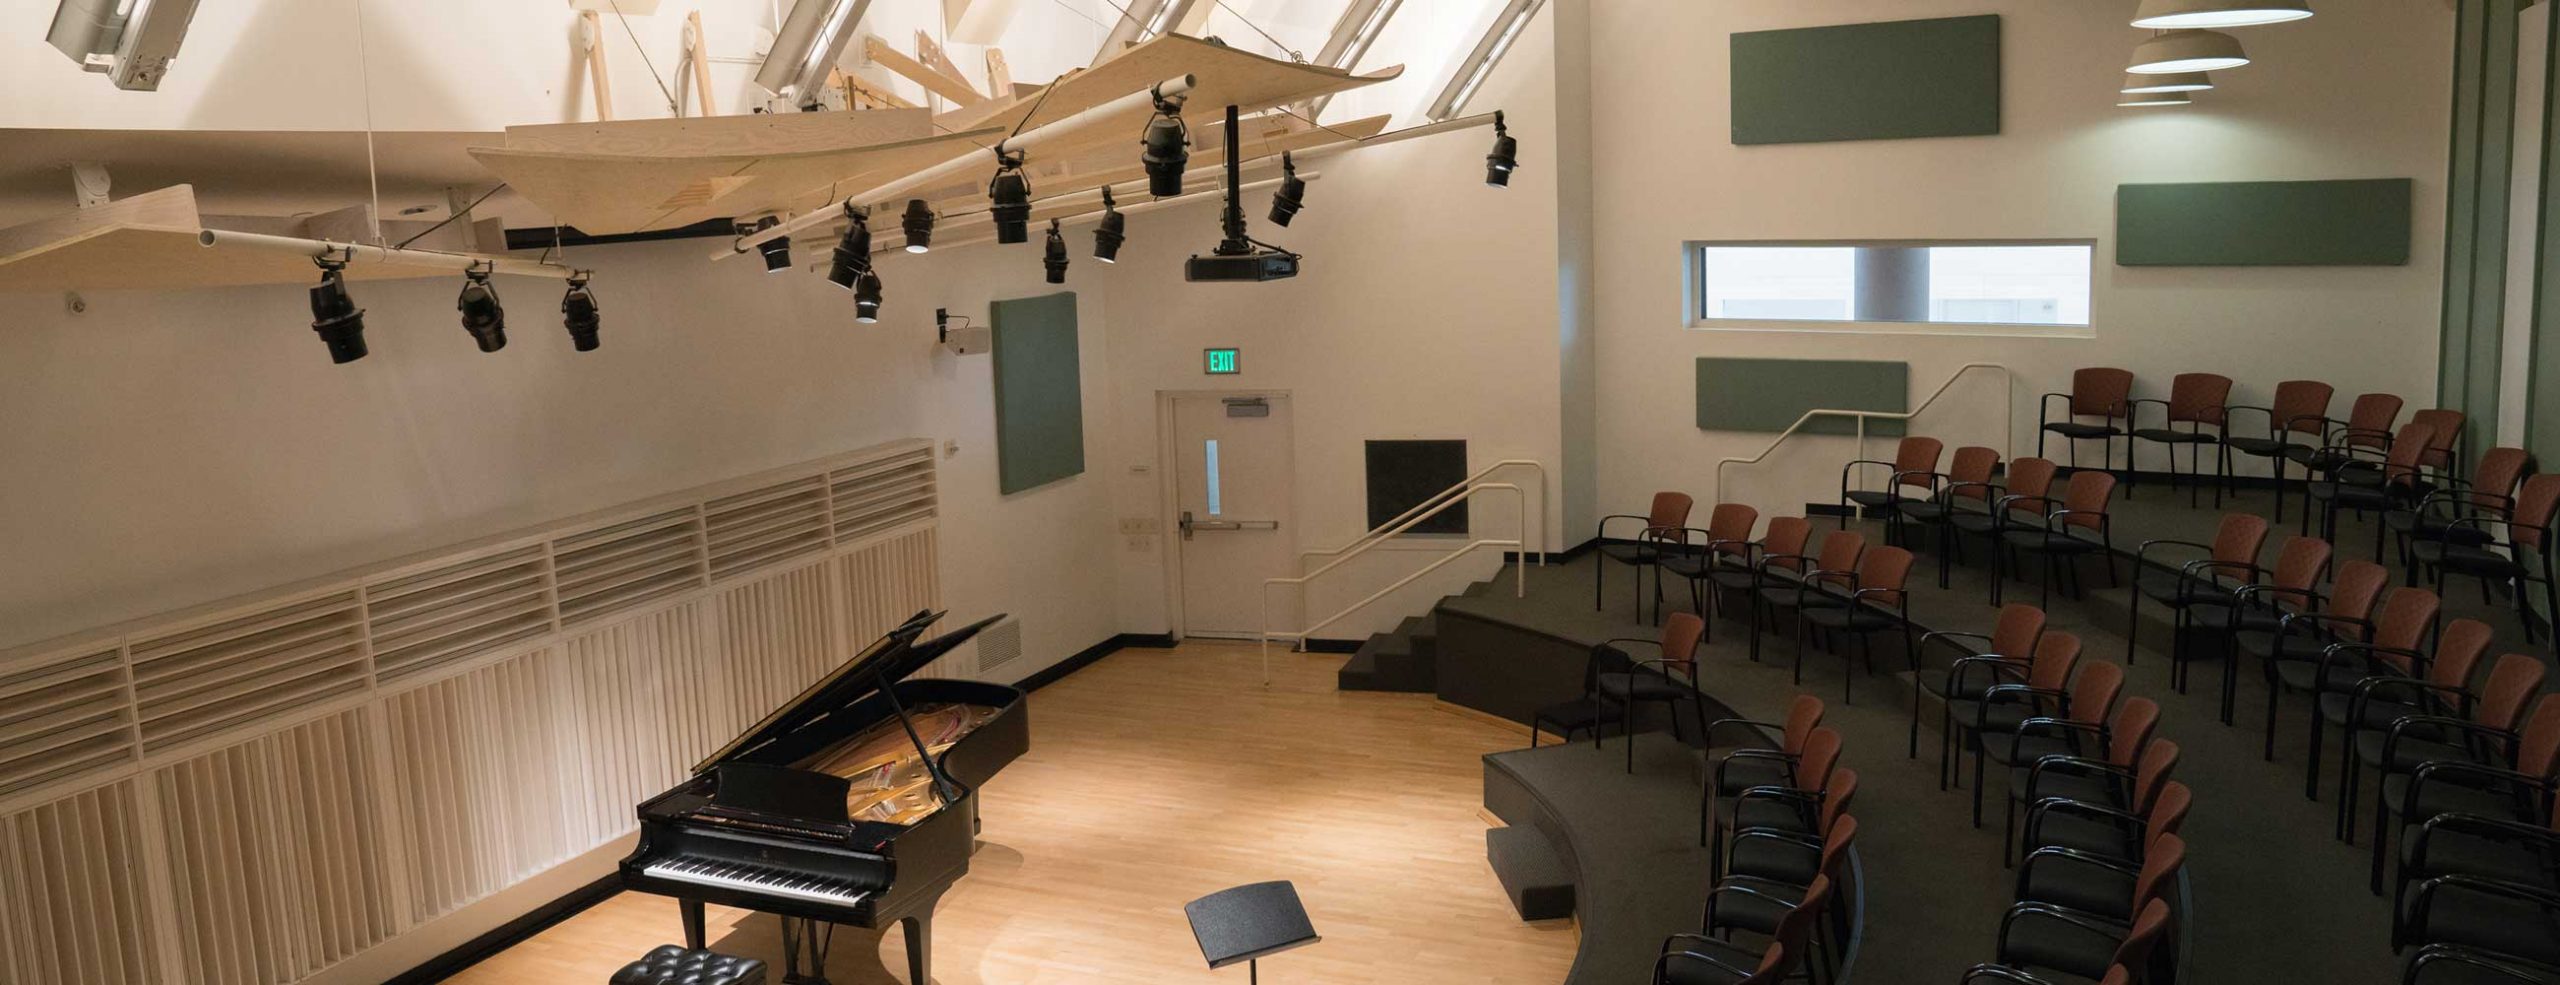 Overhead view of Mayman Hall with piano and empty lecture seats